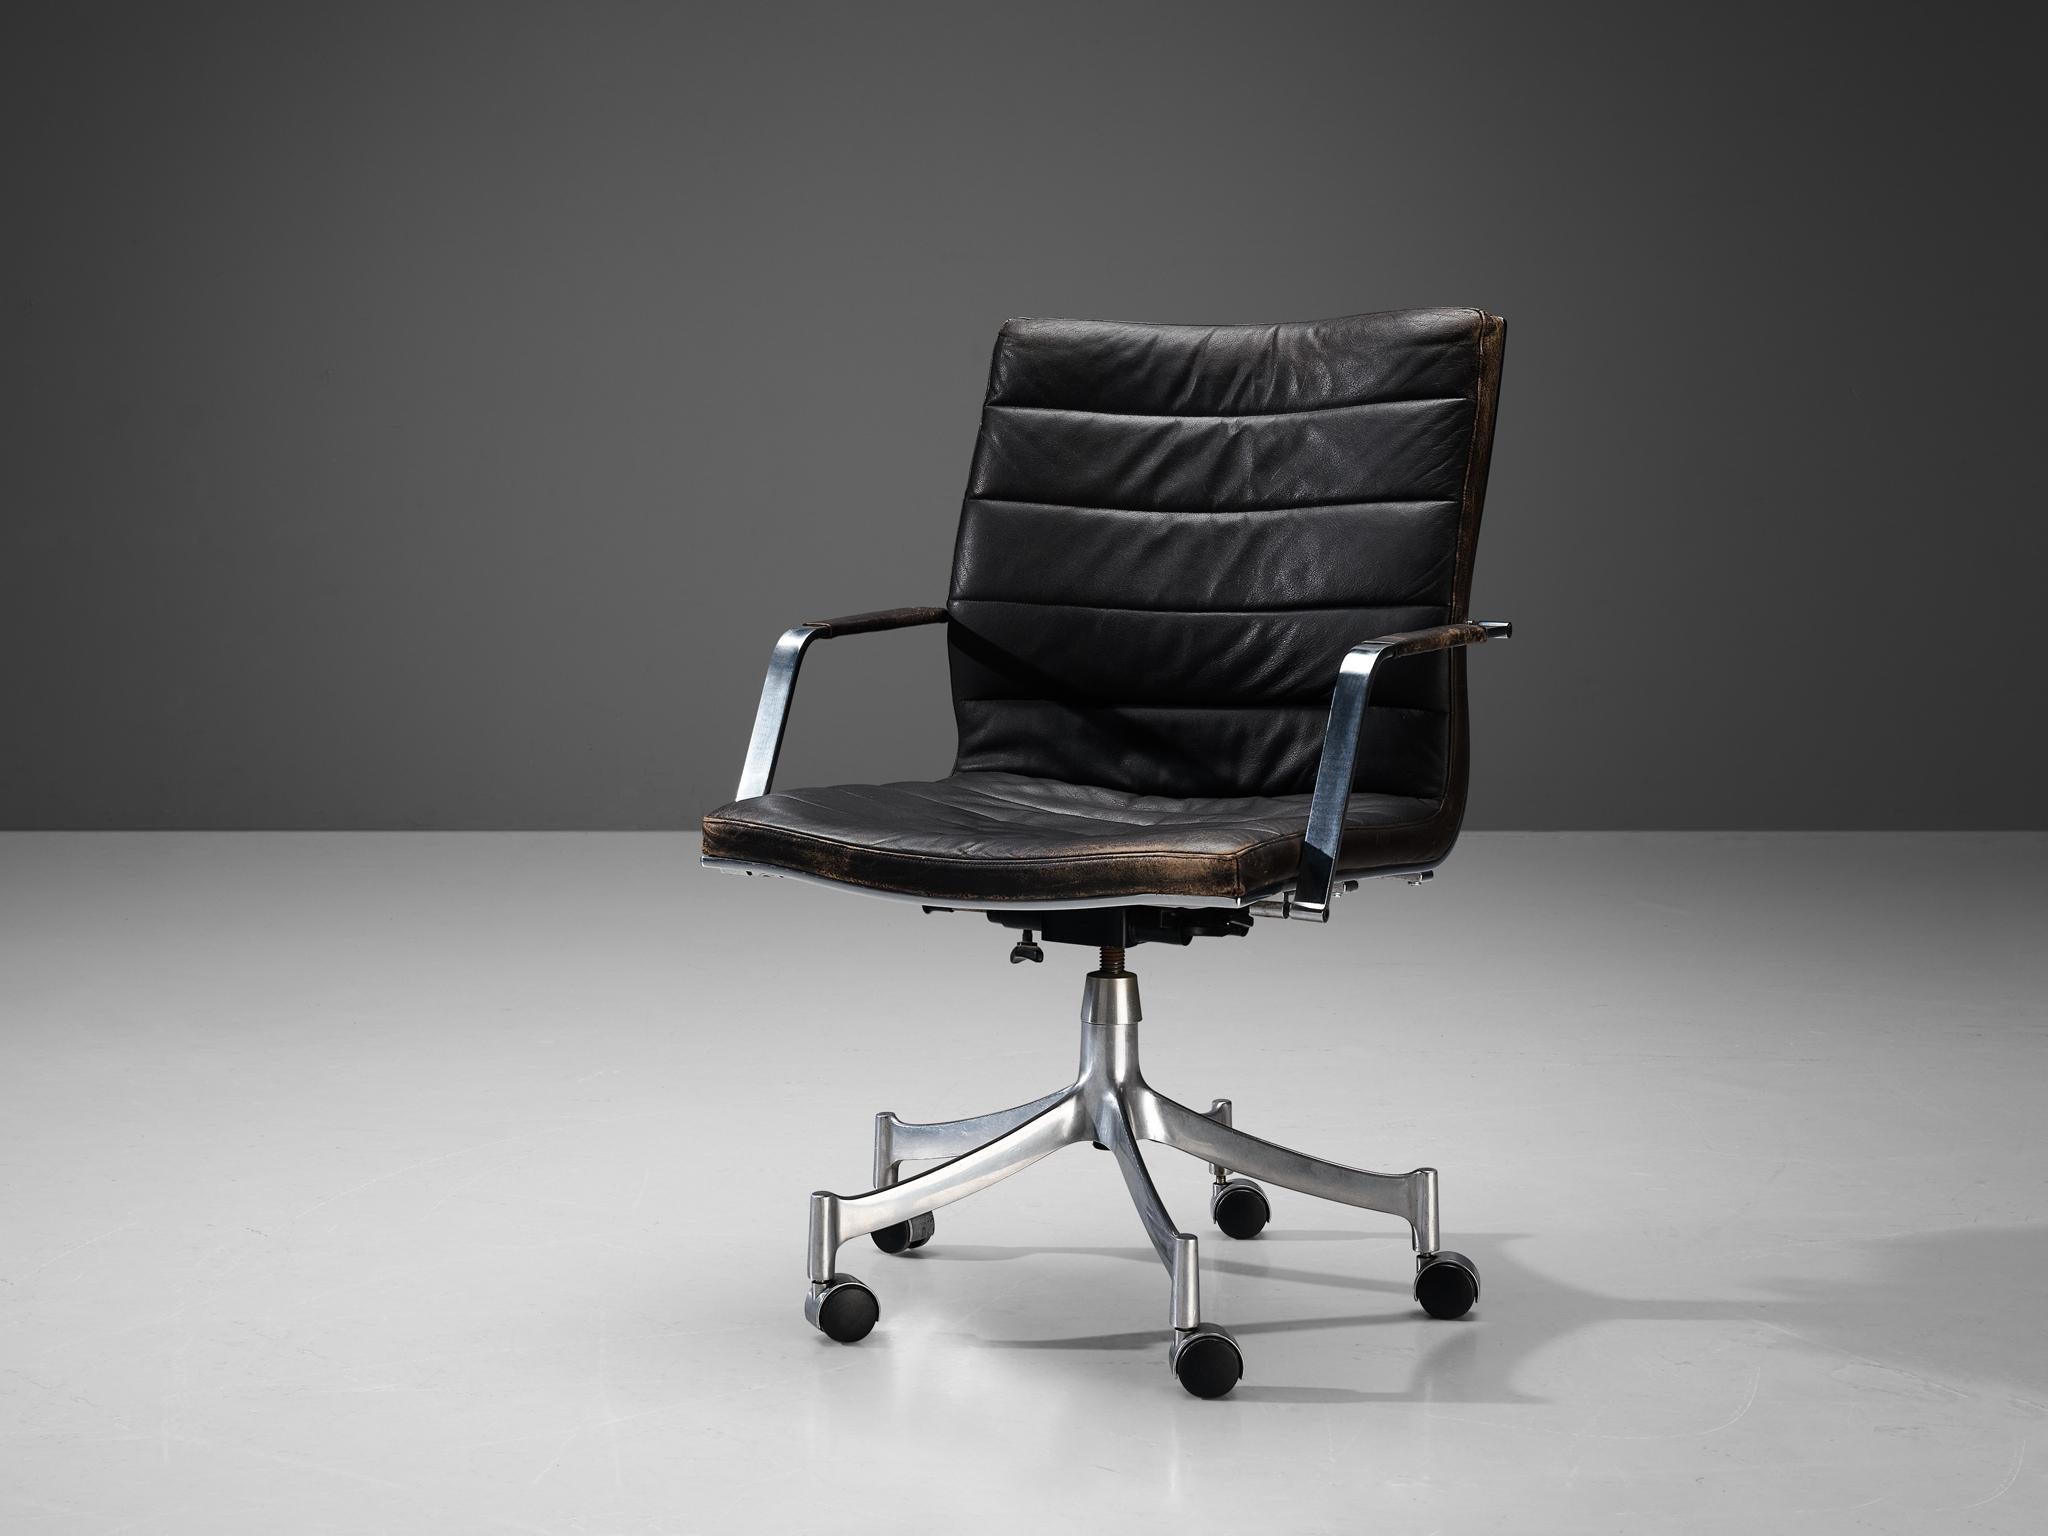 Jørgen Lund and Ole Larsen for Bo-Ex, swivel armchair model BO-854, leather, chromed steel, Europe, 1960s.

This comfortable and adjustable swiveling executive armchair is designed by Jørgen Lund and Ole Larsen for Bo-Ex. The chair is upholstered